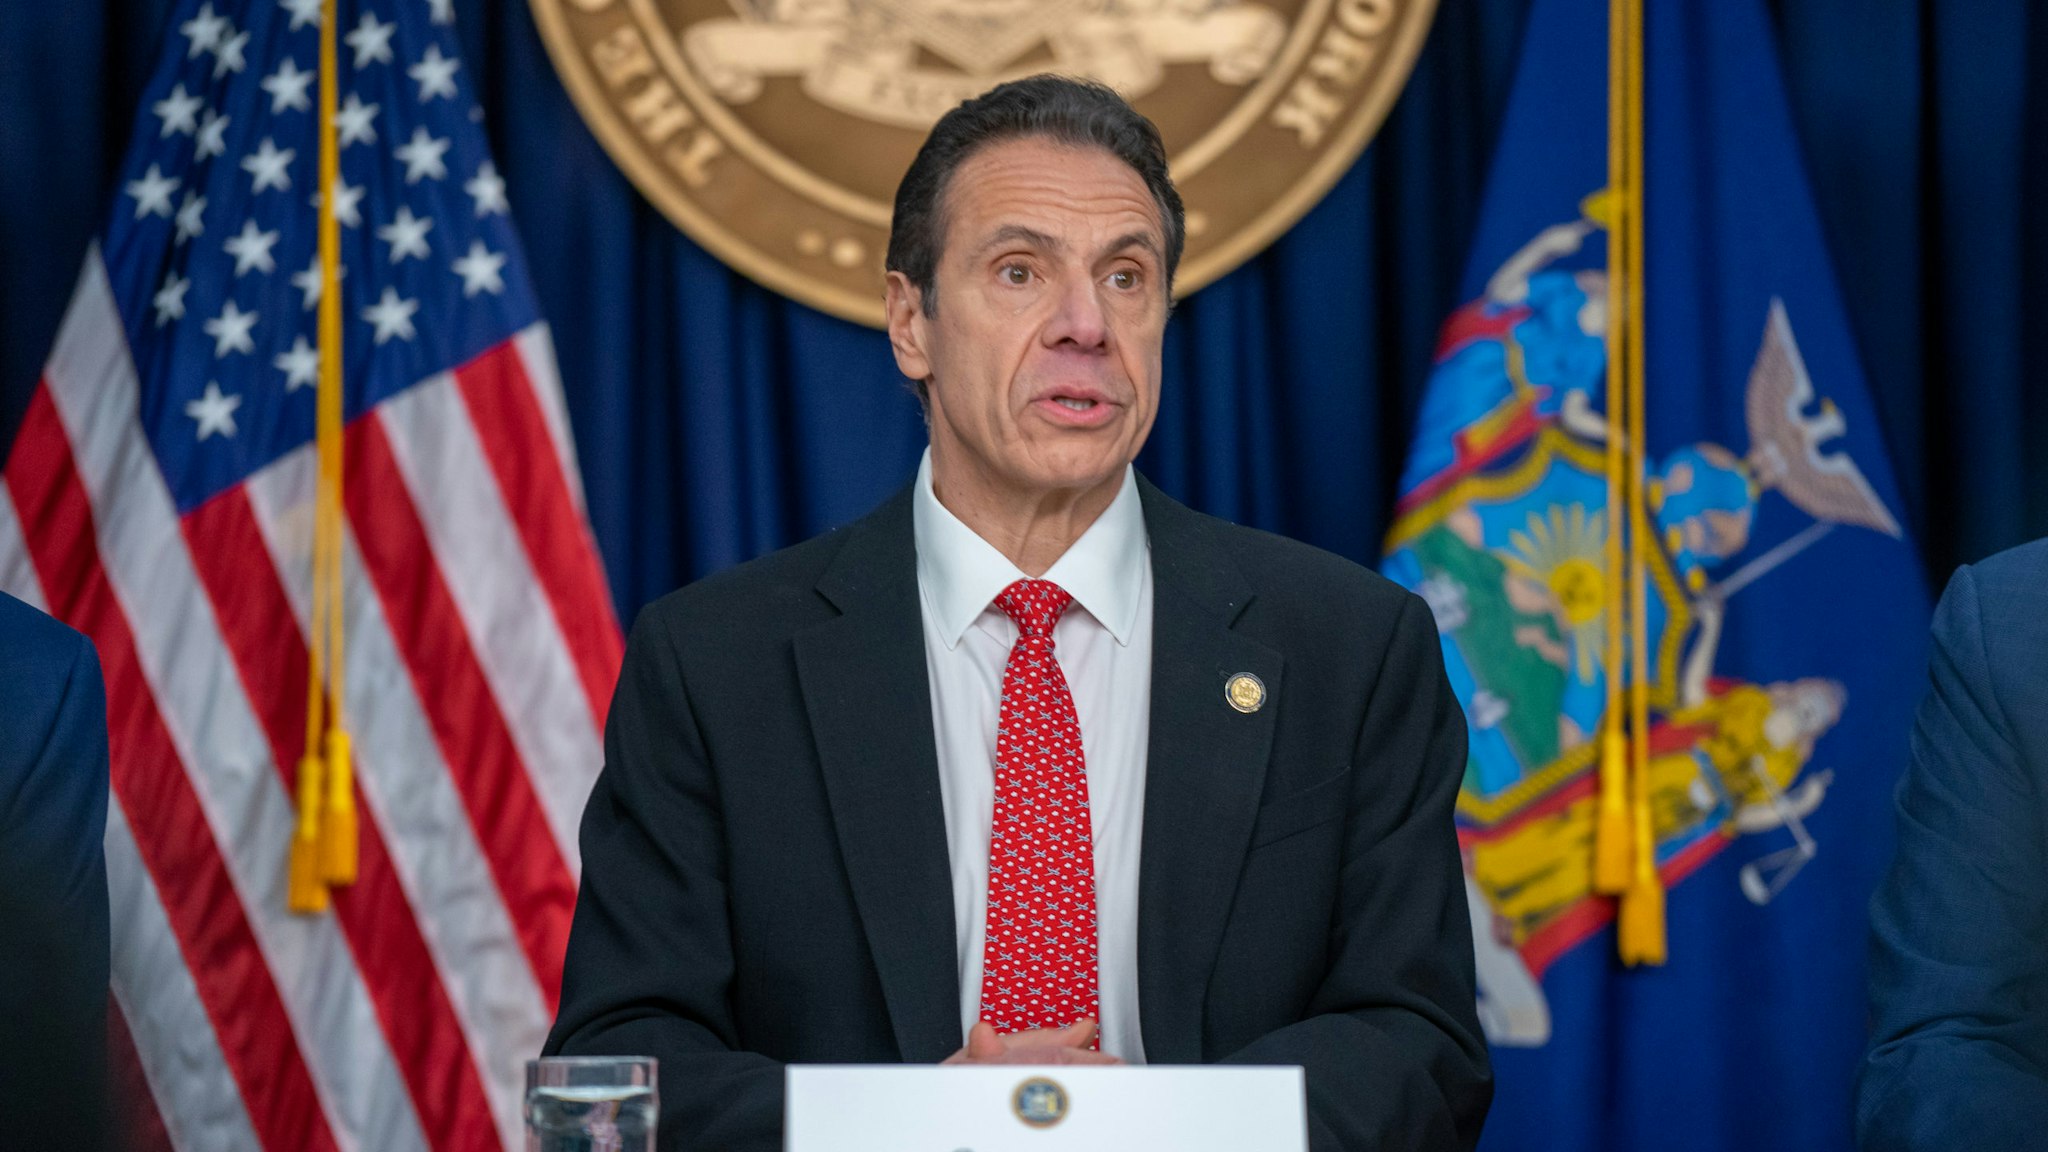 NEW YORK, NY - MARCH 2: New York state Gov. Andrew Cuomo speaks during a news conference on the first confirmed case of COVID-19 in New York on March 2, 2020 in New York City. A female health worker in her 30s who had traveled in Iran contracted the virus and is now isolated at home with symptoms of COVID-19, but is not in serious condition. Cuomo said in a statement that the patient "has been in a controlled situation since arriving to New York." (Photo by David Dee Delgado/Getty Images)